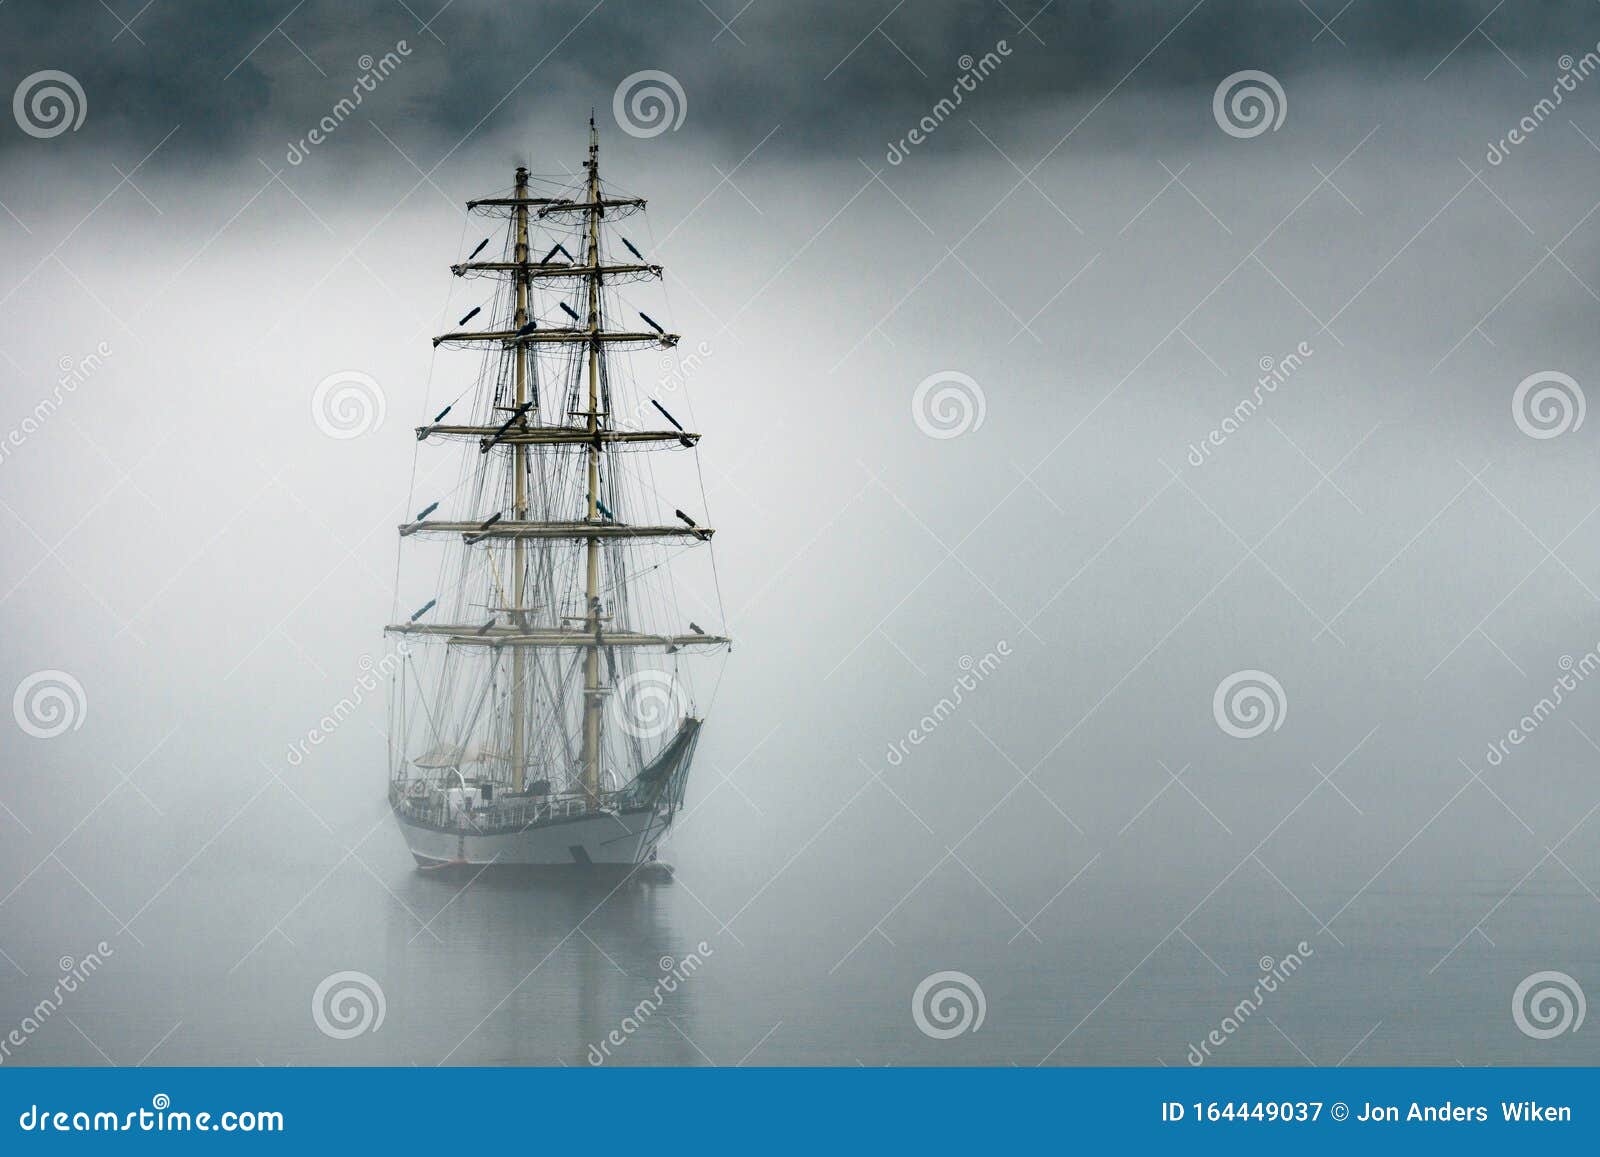 sailboat and foggy weather